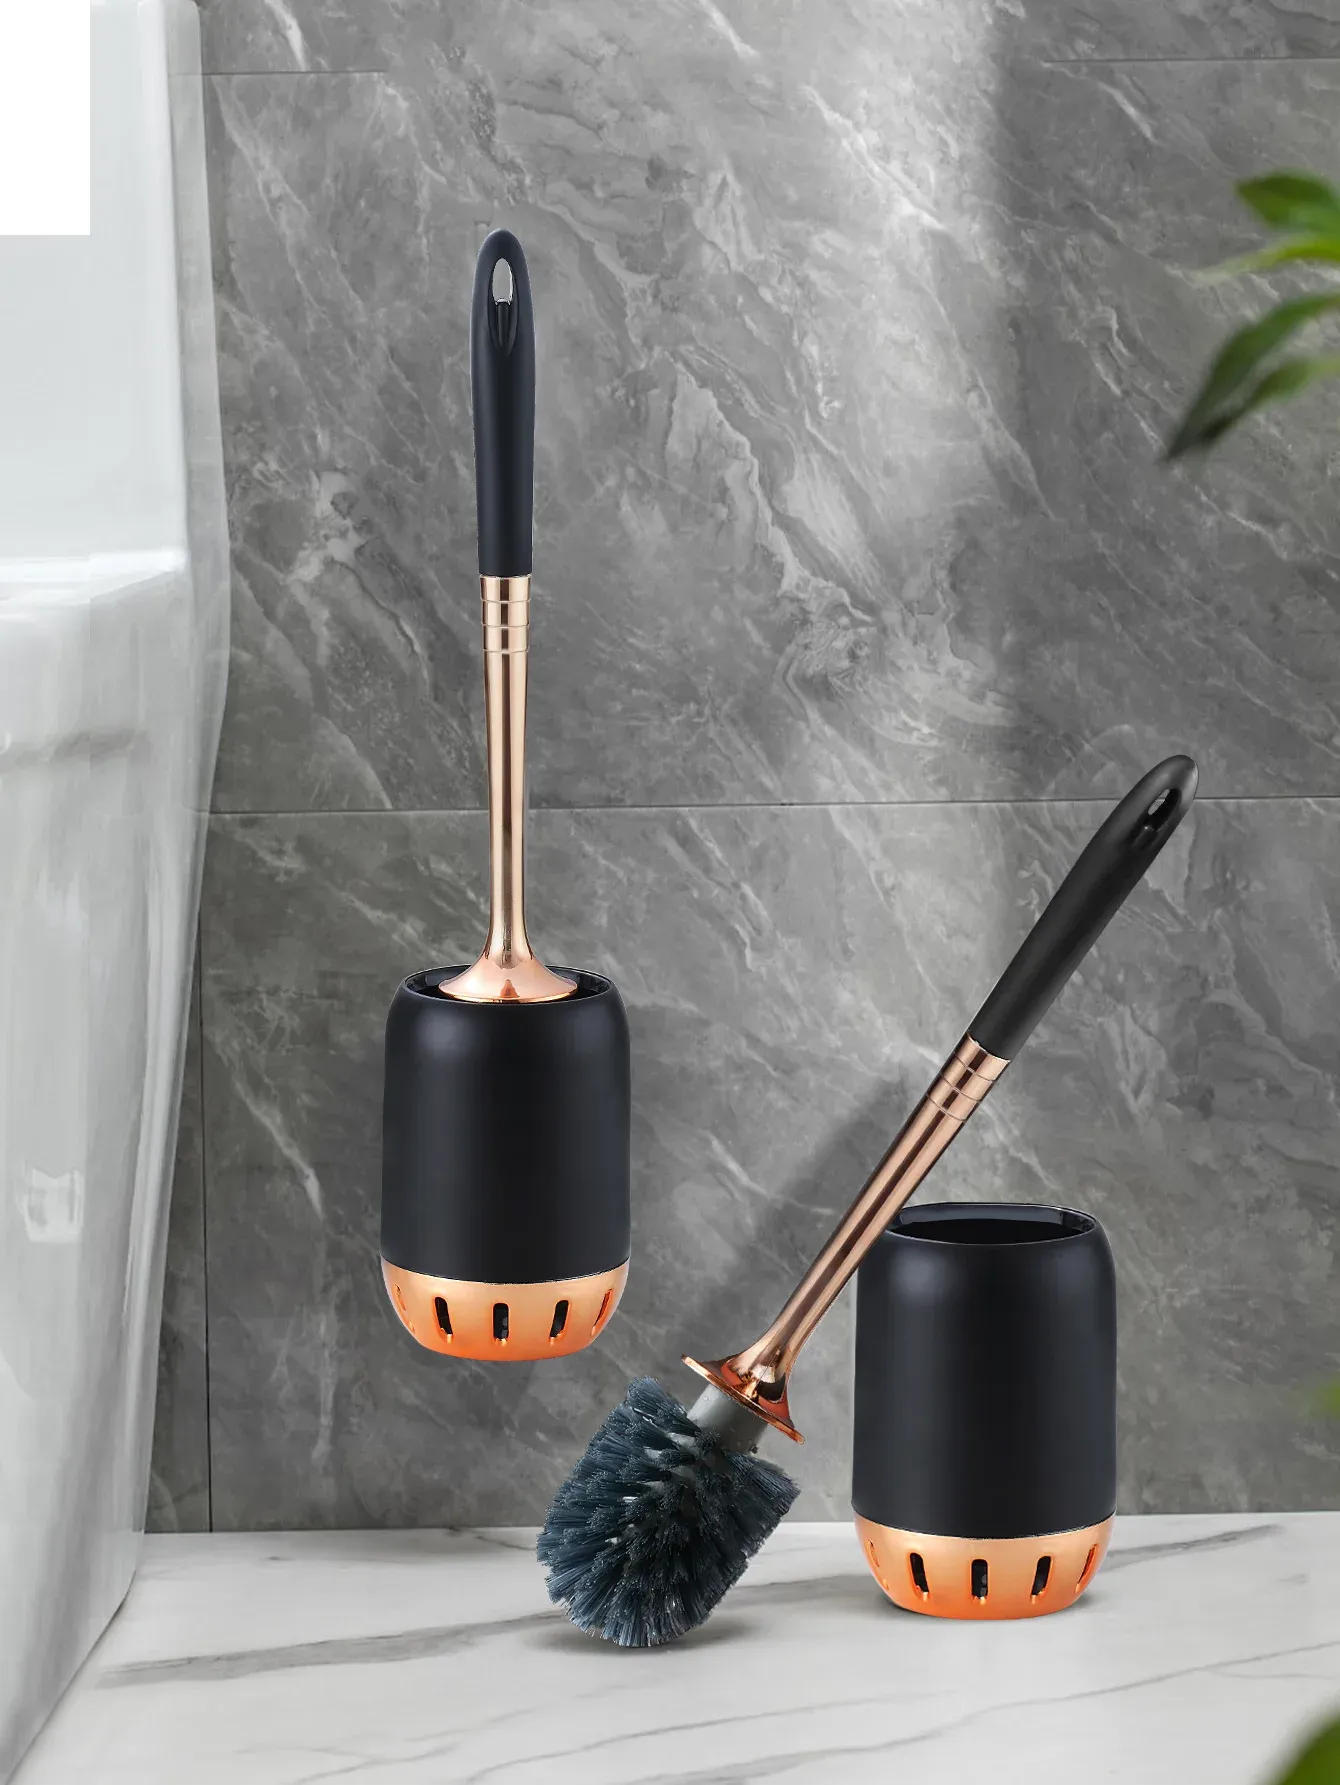 Holders WORTHBUY Wall Hanging Toilet Brush With Holder WC Long Handle Cleaning Brush Detachable No Dead Angle Cleaner Bathroom Tools